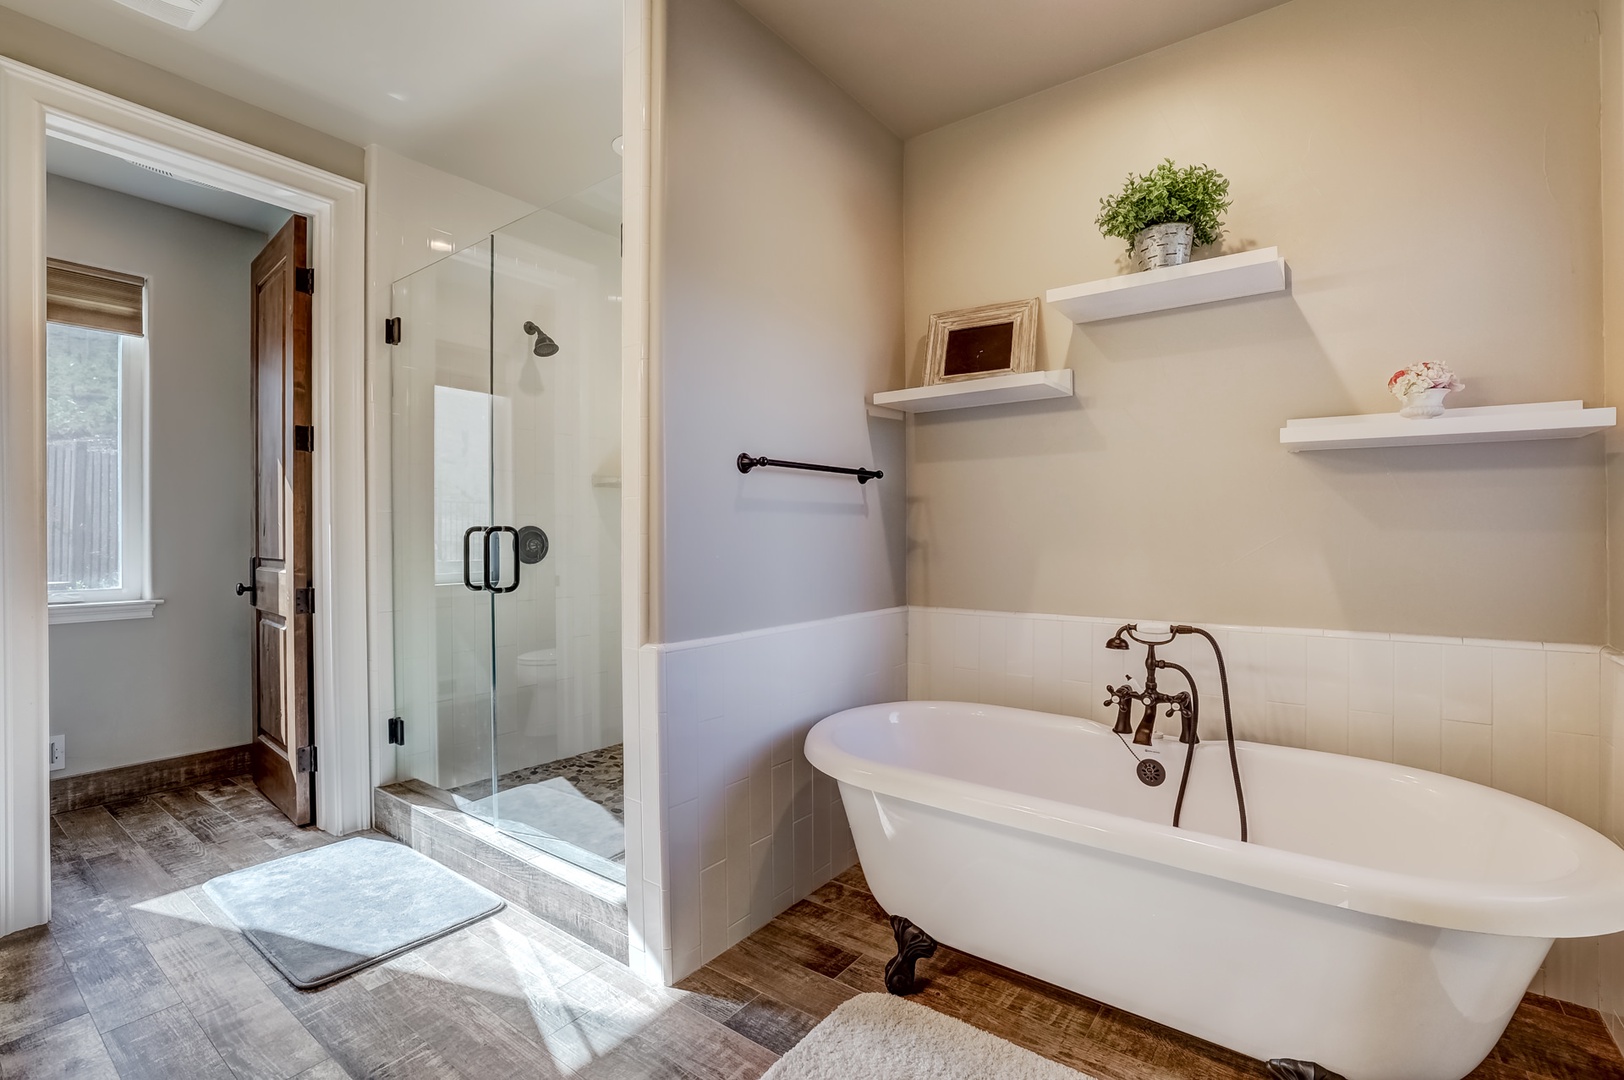 En-suite Master bathroom with walk-in shower and soaking tub